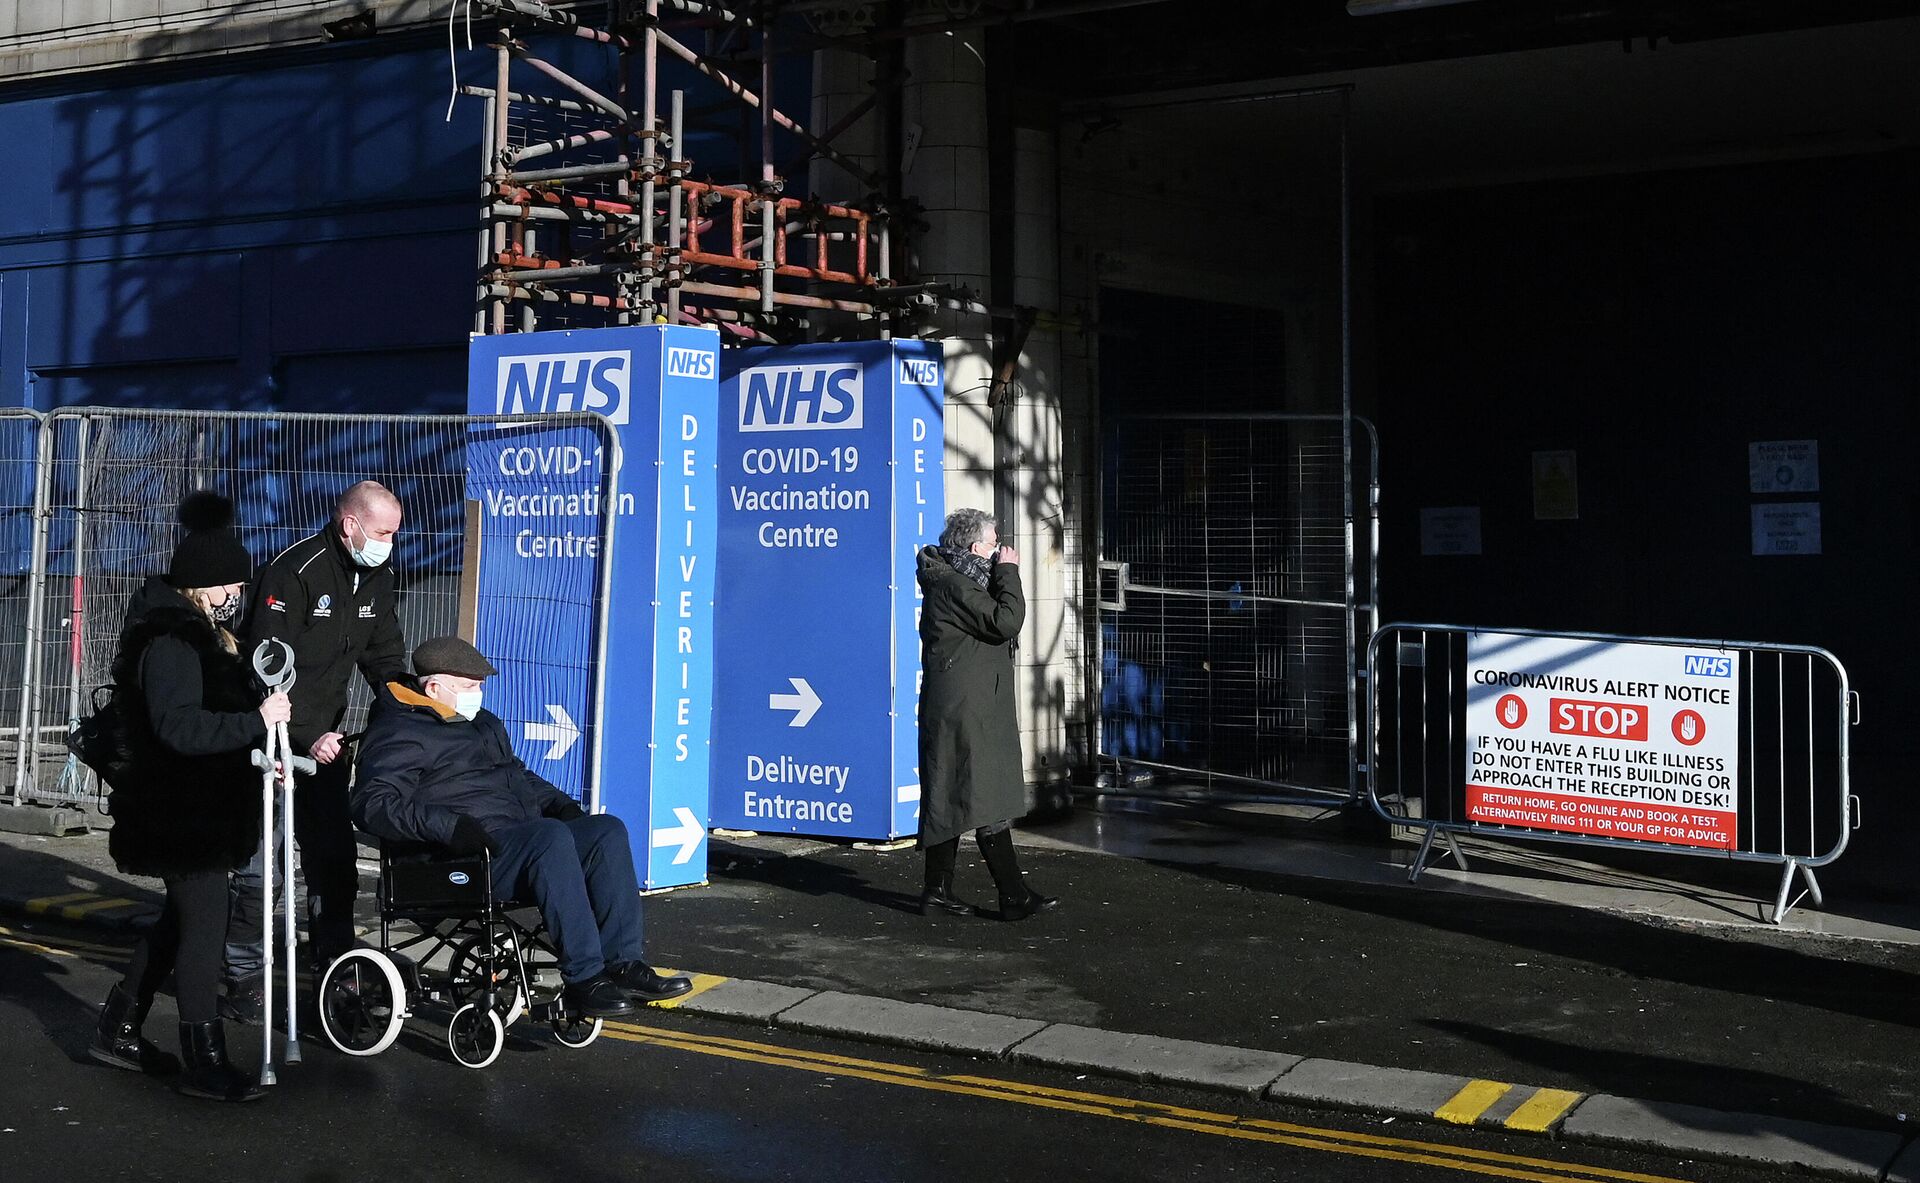 NHS signage is pictured outside the historic Winter Gardens venue in Blackpool, northwest England, on January 25, 2021 which has been converted for use as a vaccination centre - Sputnik International, 1920, 24.10.2021